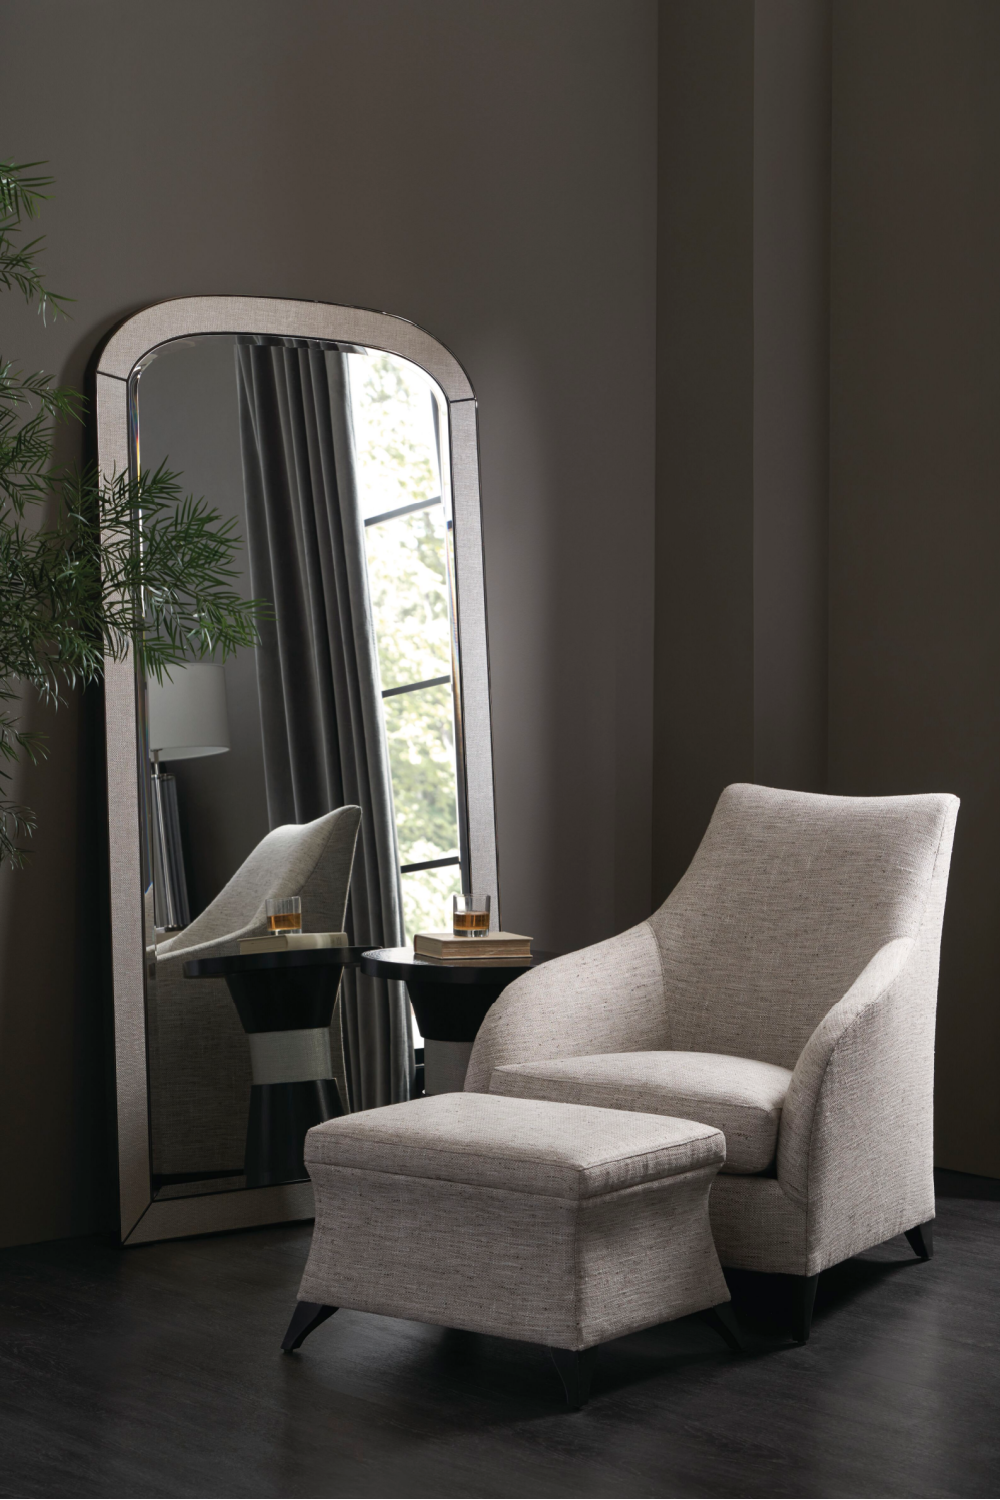 Arched Beveled Floor Mirror | Caracole Vantage Point | Oroa.com